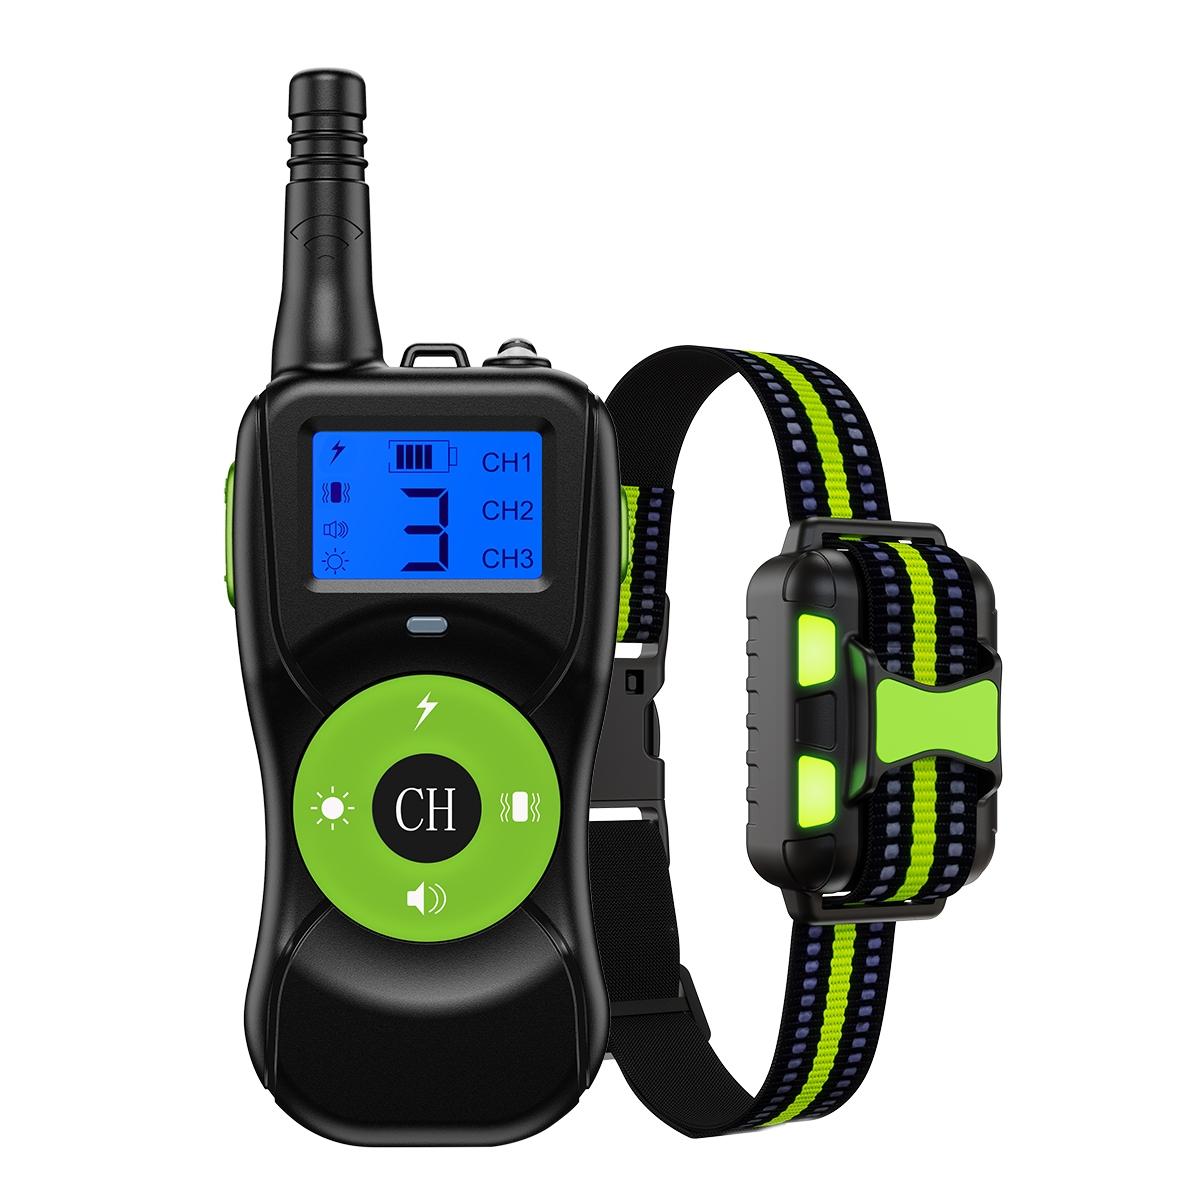 Smart Electronic Remote Control Dog Training Device Waterproof Pets Bark Stopper, Size: For-One-Dog(Fluorescent Green)